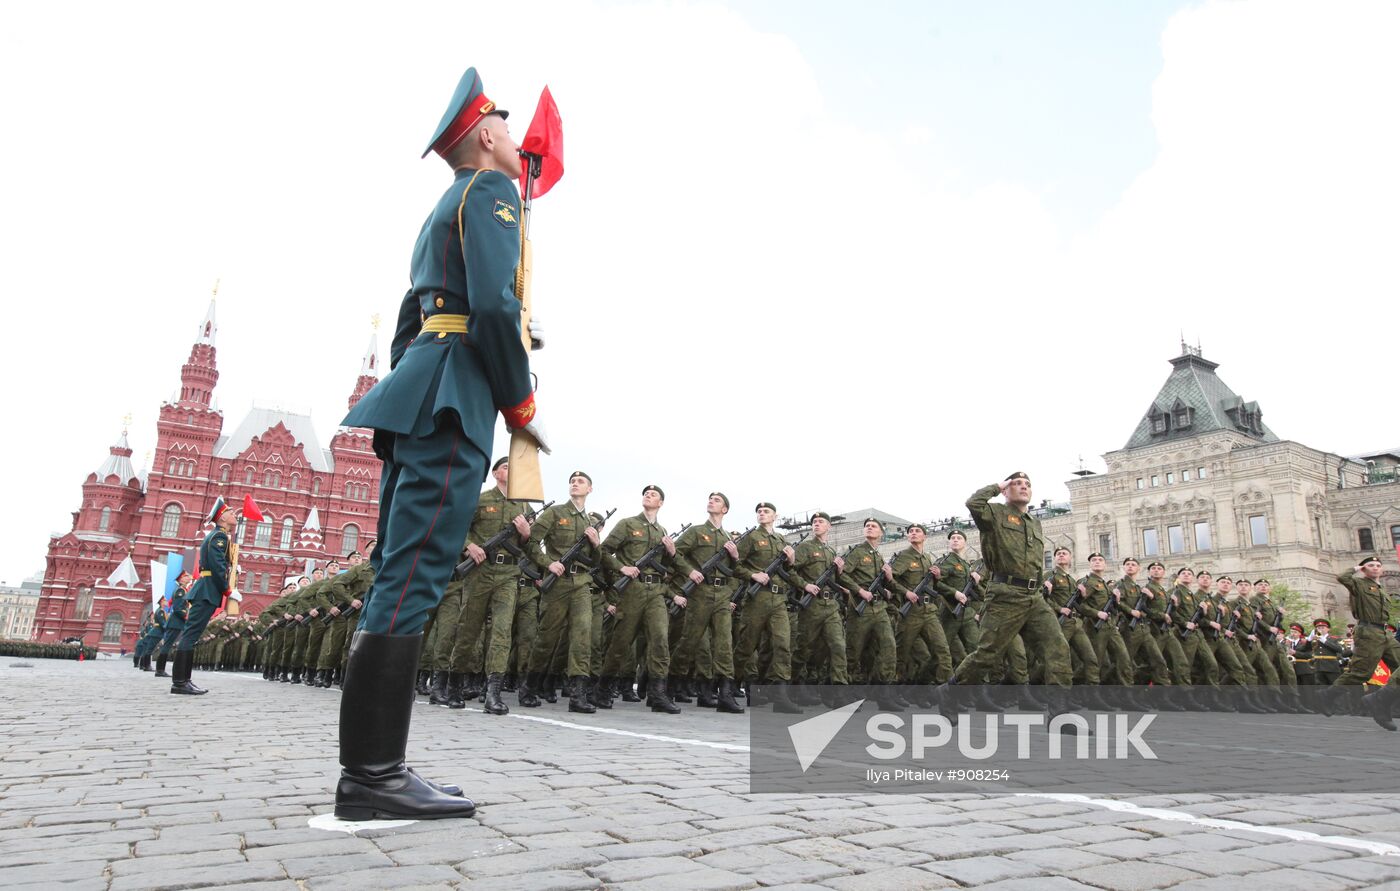 Military parade on 66th anniversary of Victory in WWII